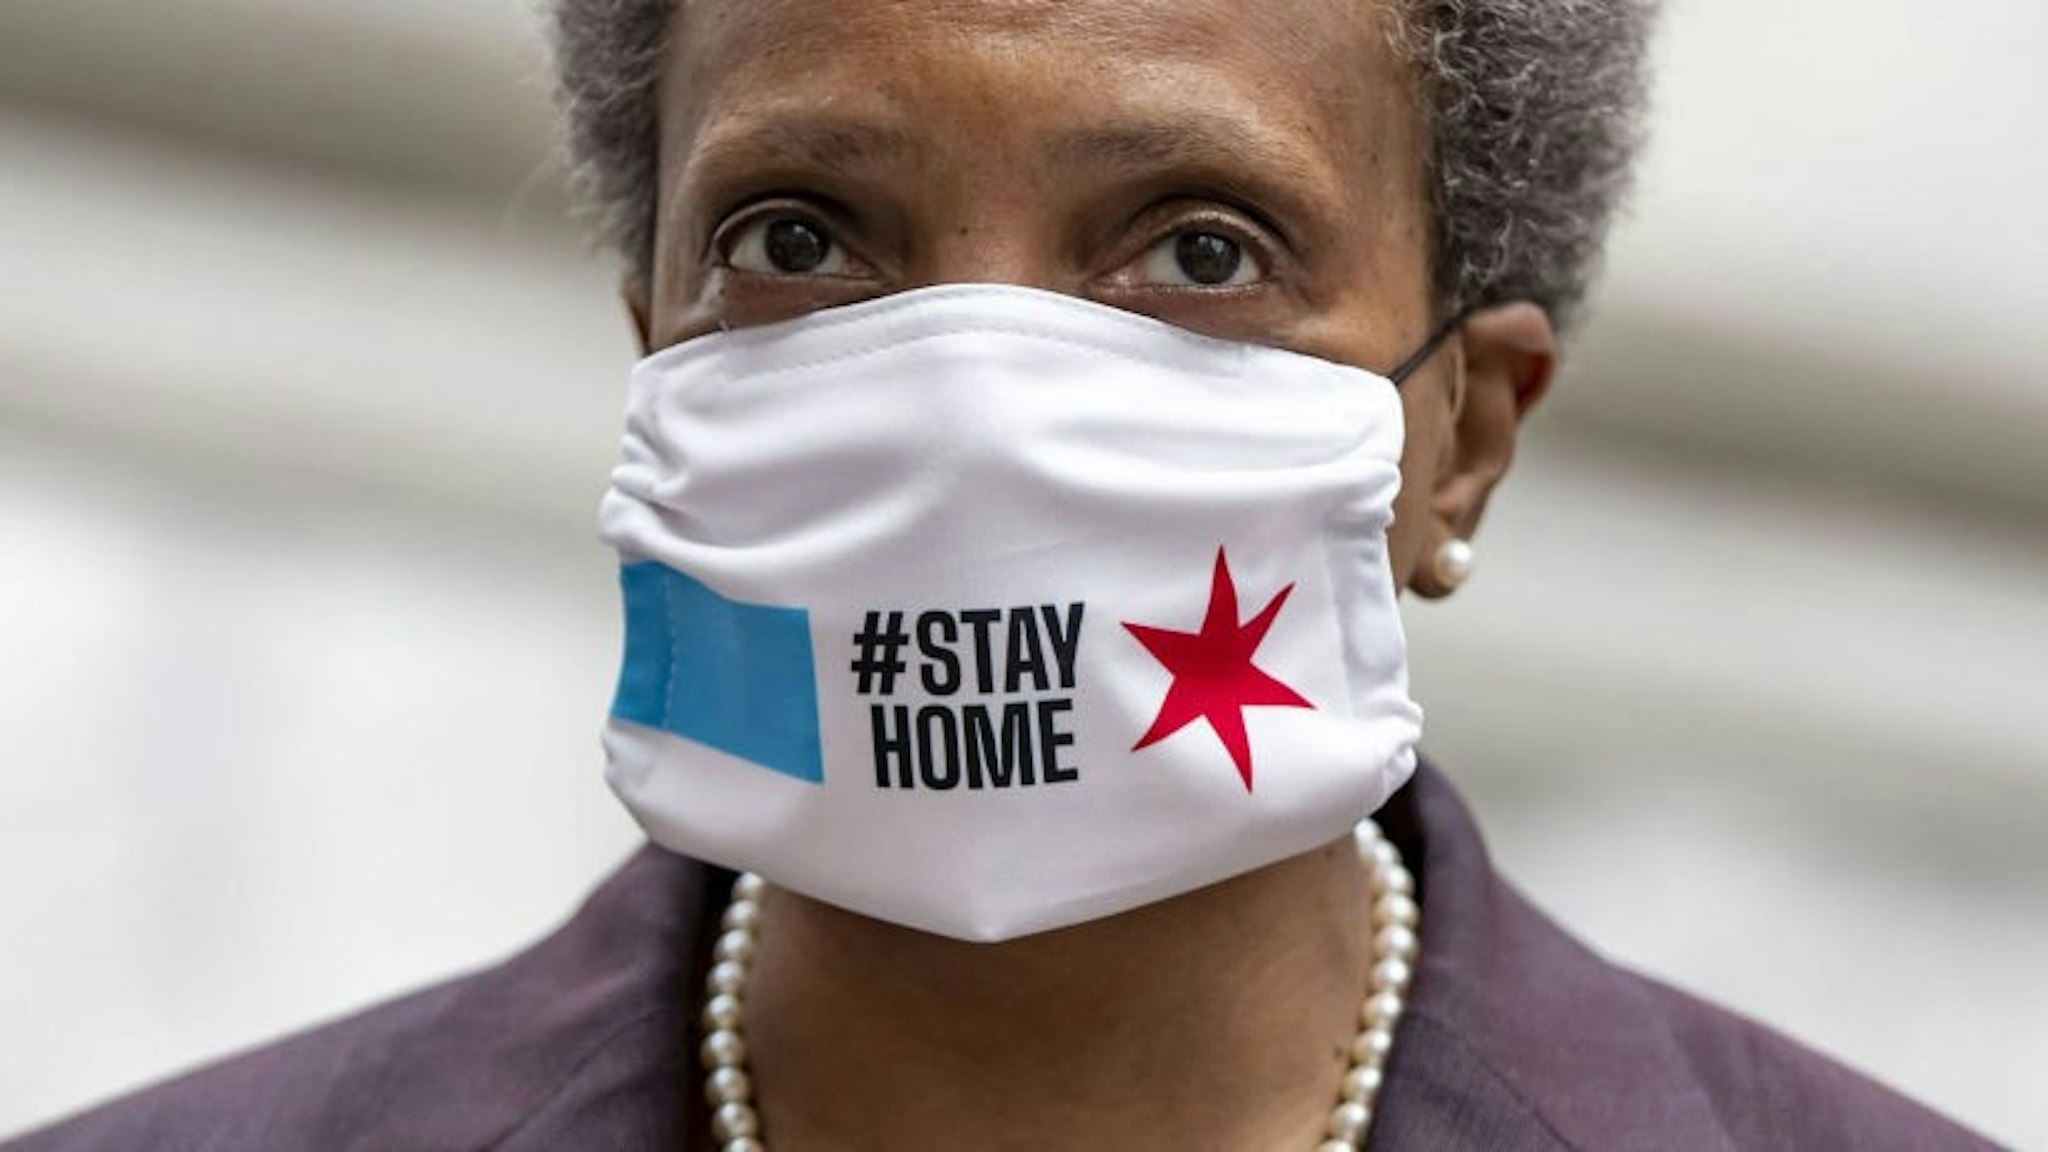 Chicago mayor Lori Lightfoot wears a mask as she prepares to speak about the city's coronavirus economic recovery plan on April 23, 2020.